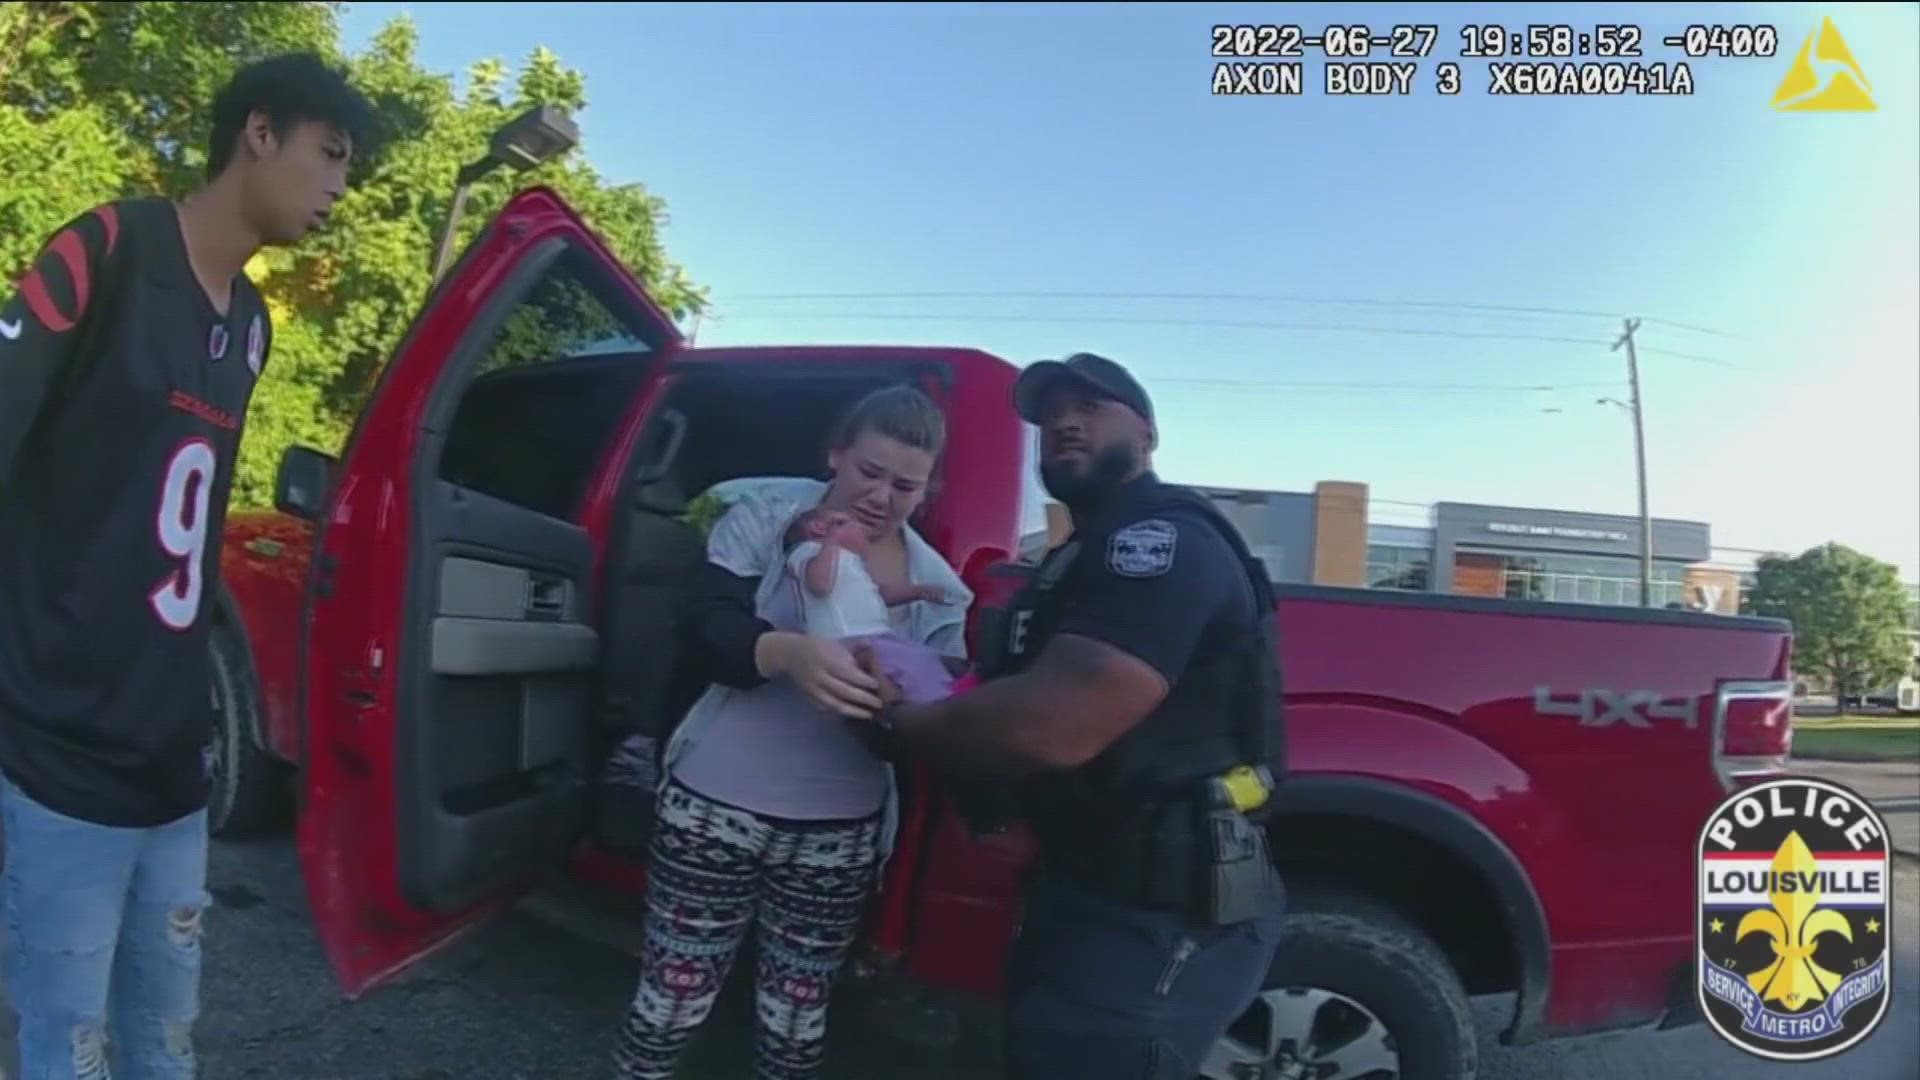 A man ran into a Louisville gas station saying his 7-day-old baby wasn't breathing. Body camera footage captured officers' life-saving actions.